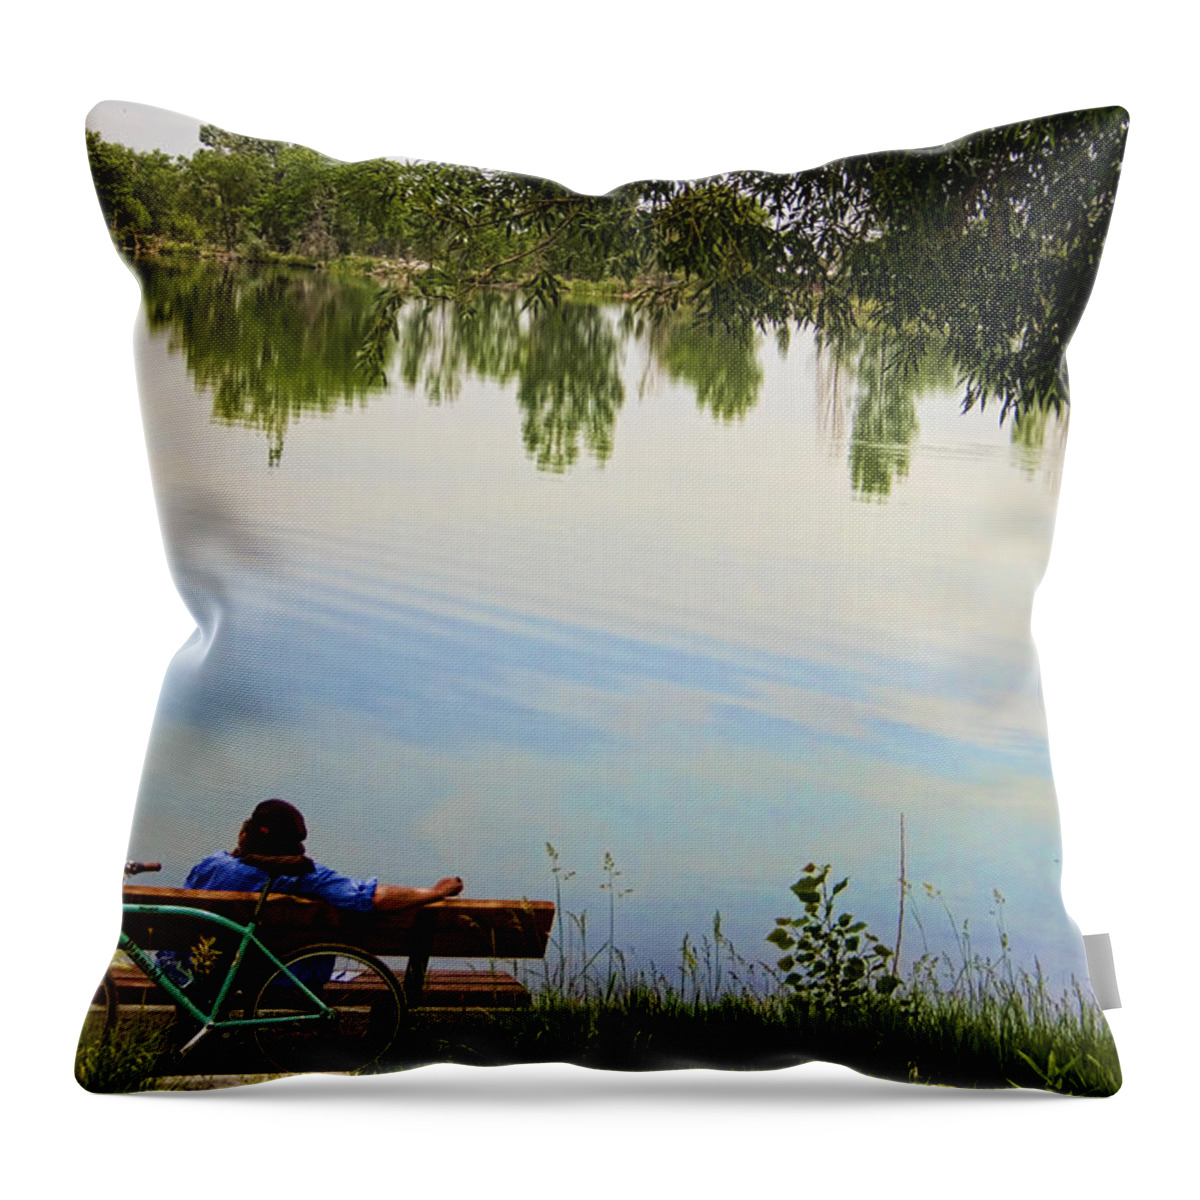 Man Throw Pillow featuring the photograph Leisure Afternoon by James BO Insogna